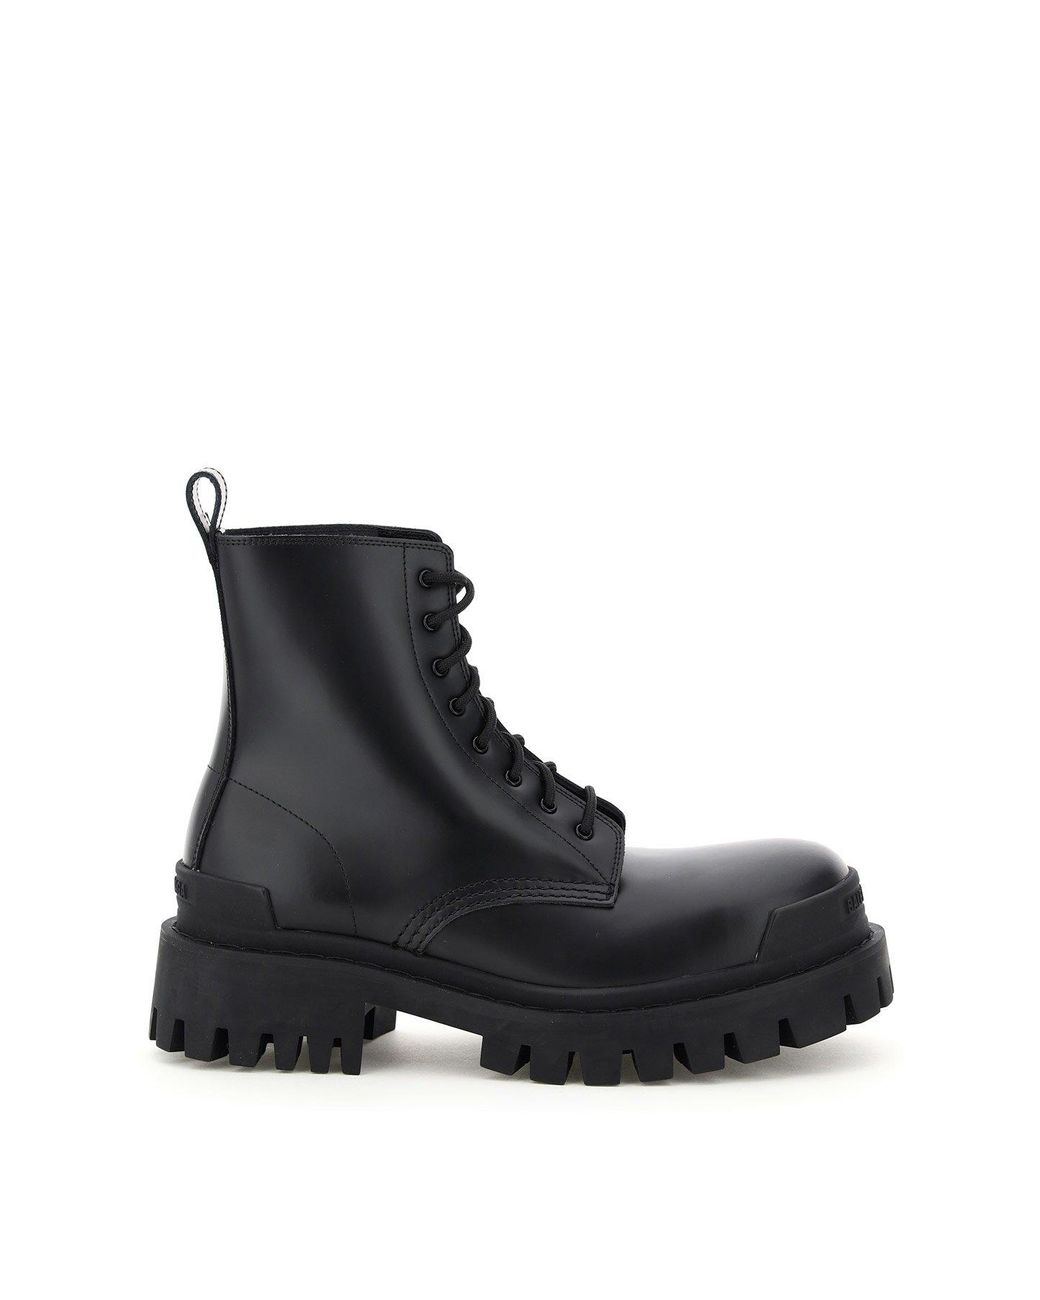 Balenciaga Leather Strike Combat Boots in Black - Save 4% - Lyst